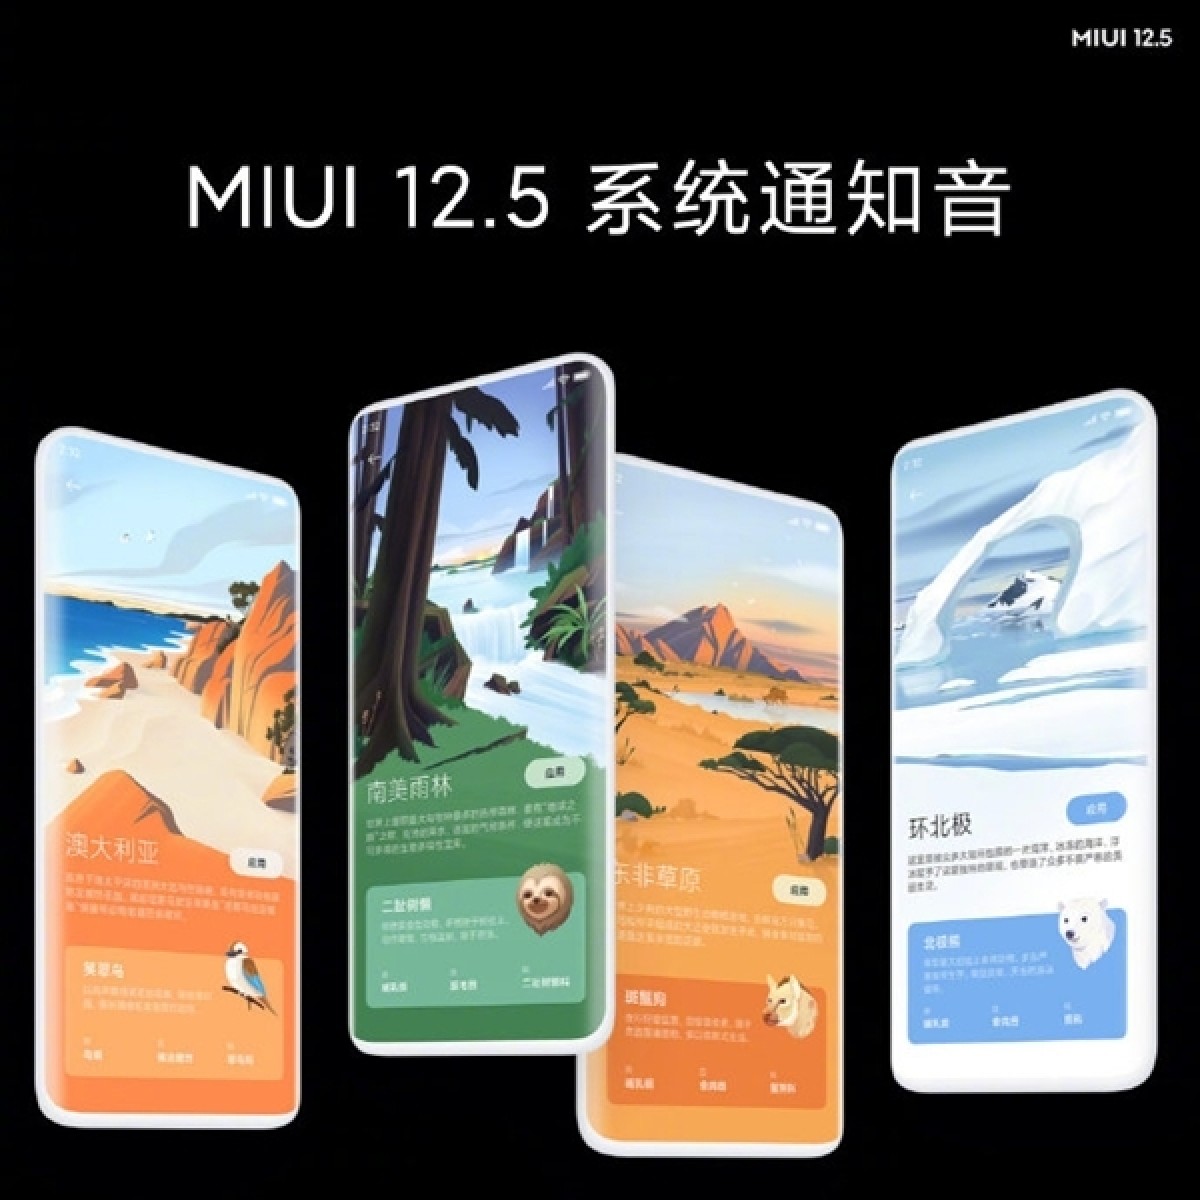 Xiaomi announces all-new MIUI 12.5 that is quicker, safer and prettier than any predecessor